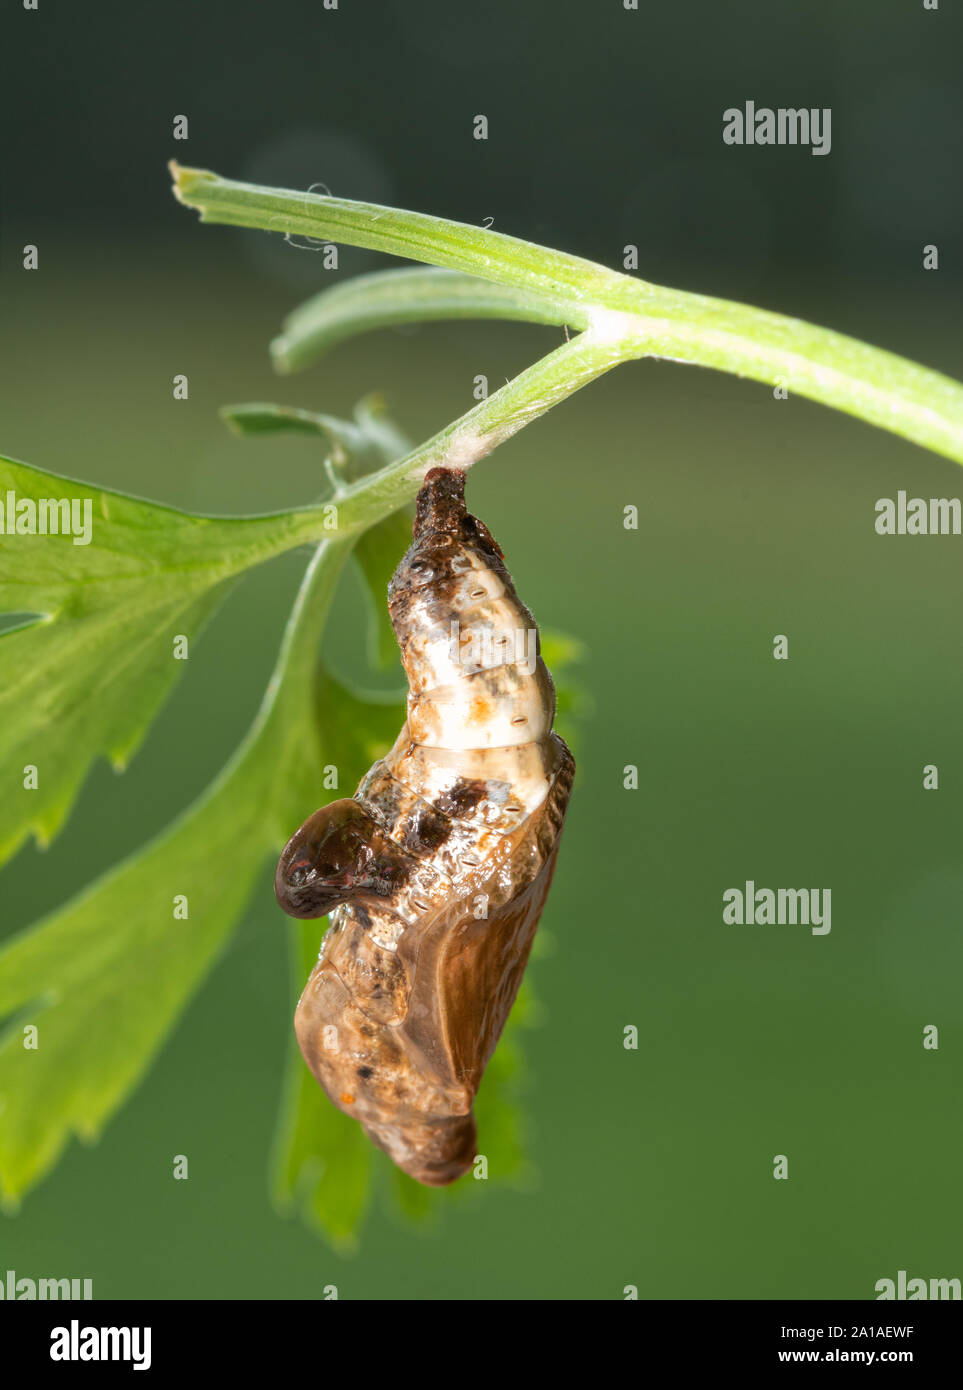 Freshly pupated Red-spotted Purple butterfly chrysalis hanging on a parsley stalk Stock Photo